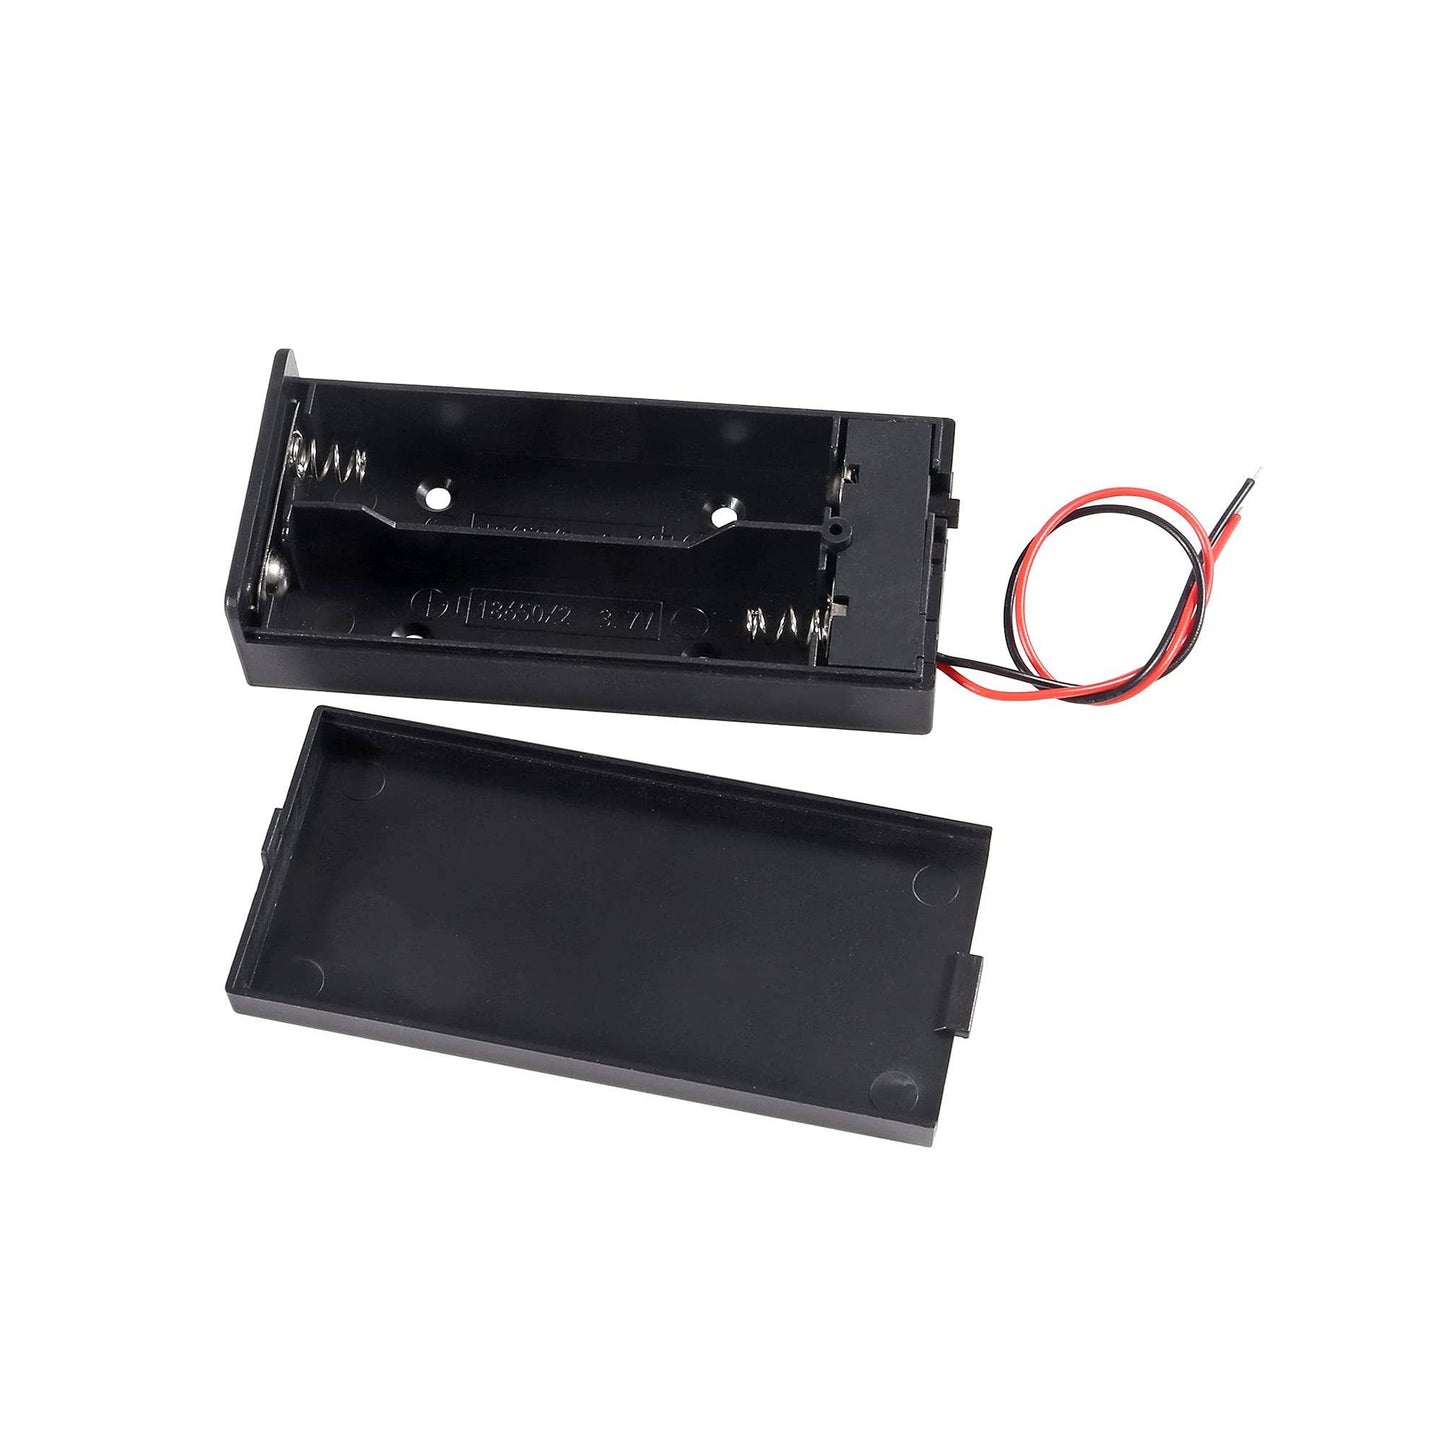 2x18650 Battery Holder 18650 x 2 Battery Holder with Cover